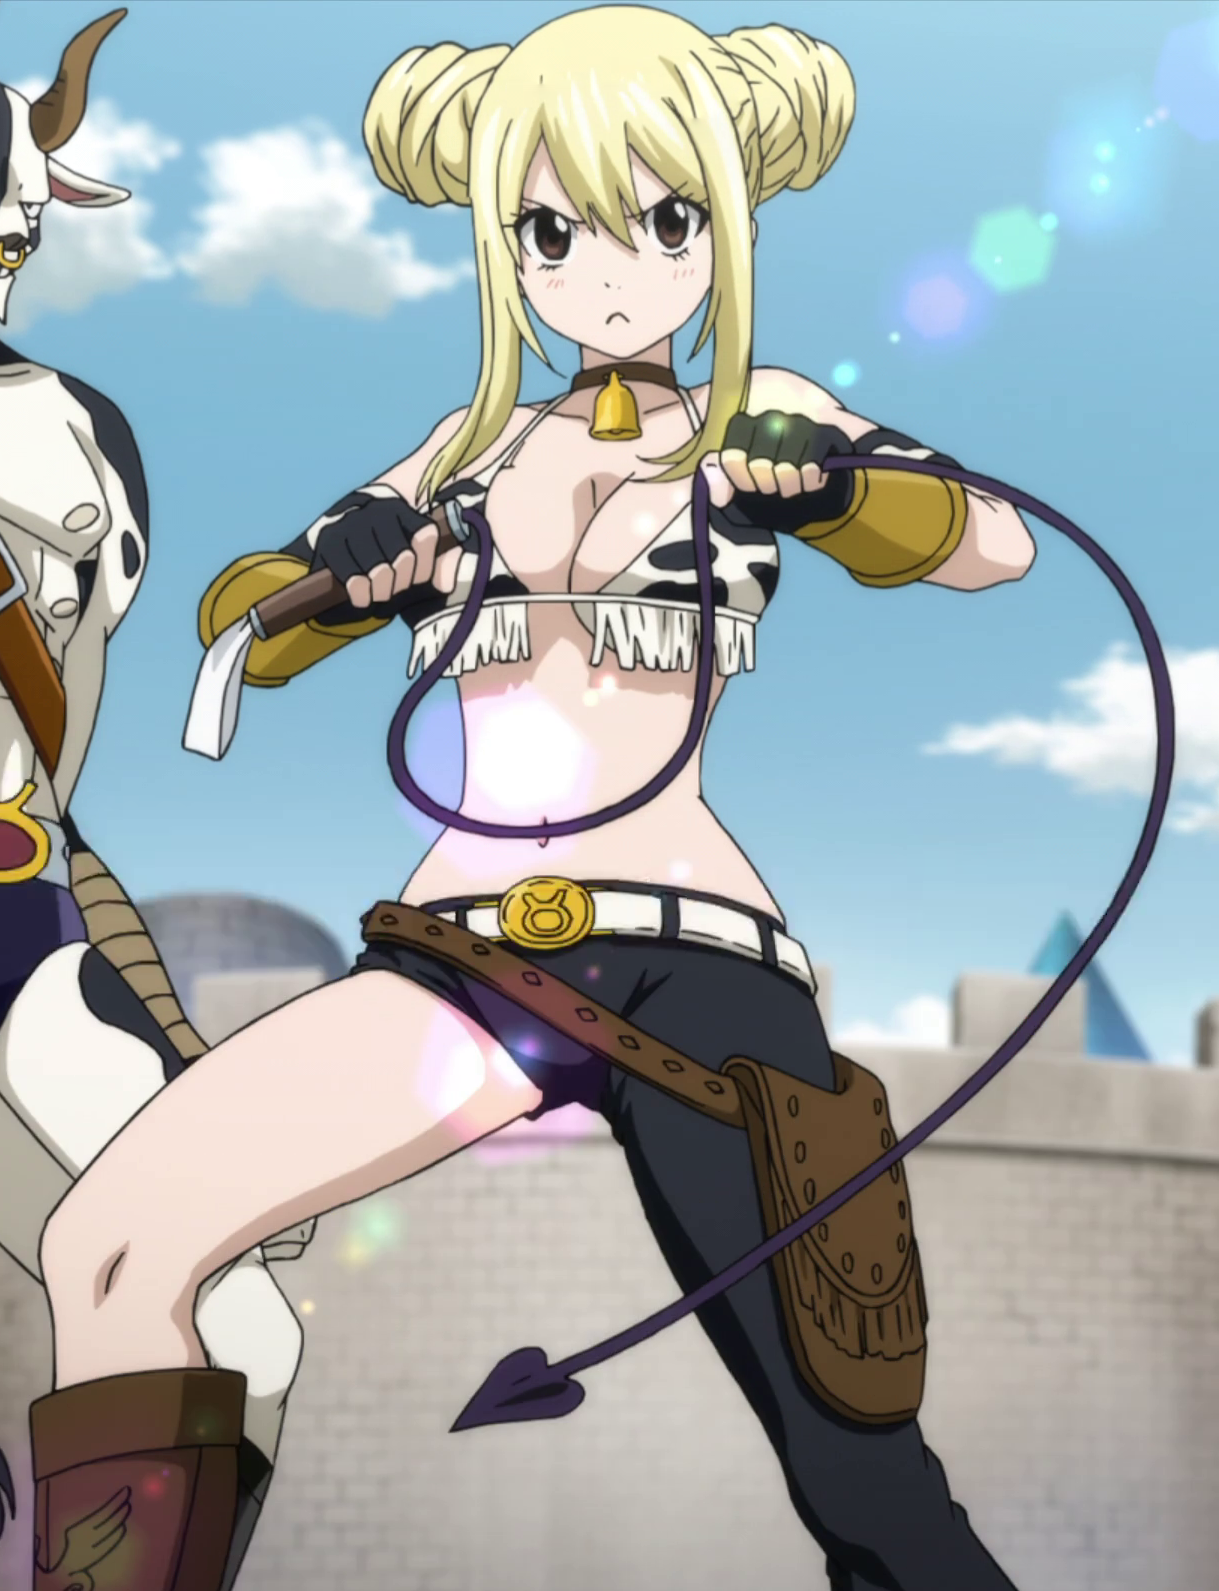 fairy tail lucy costume